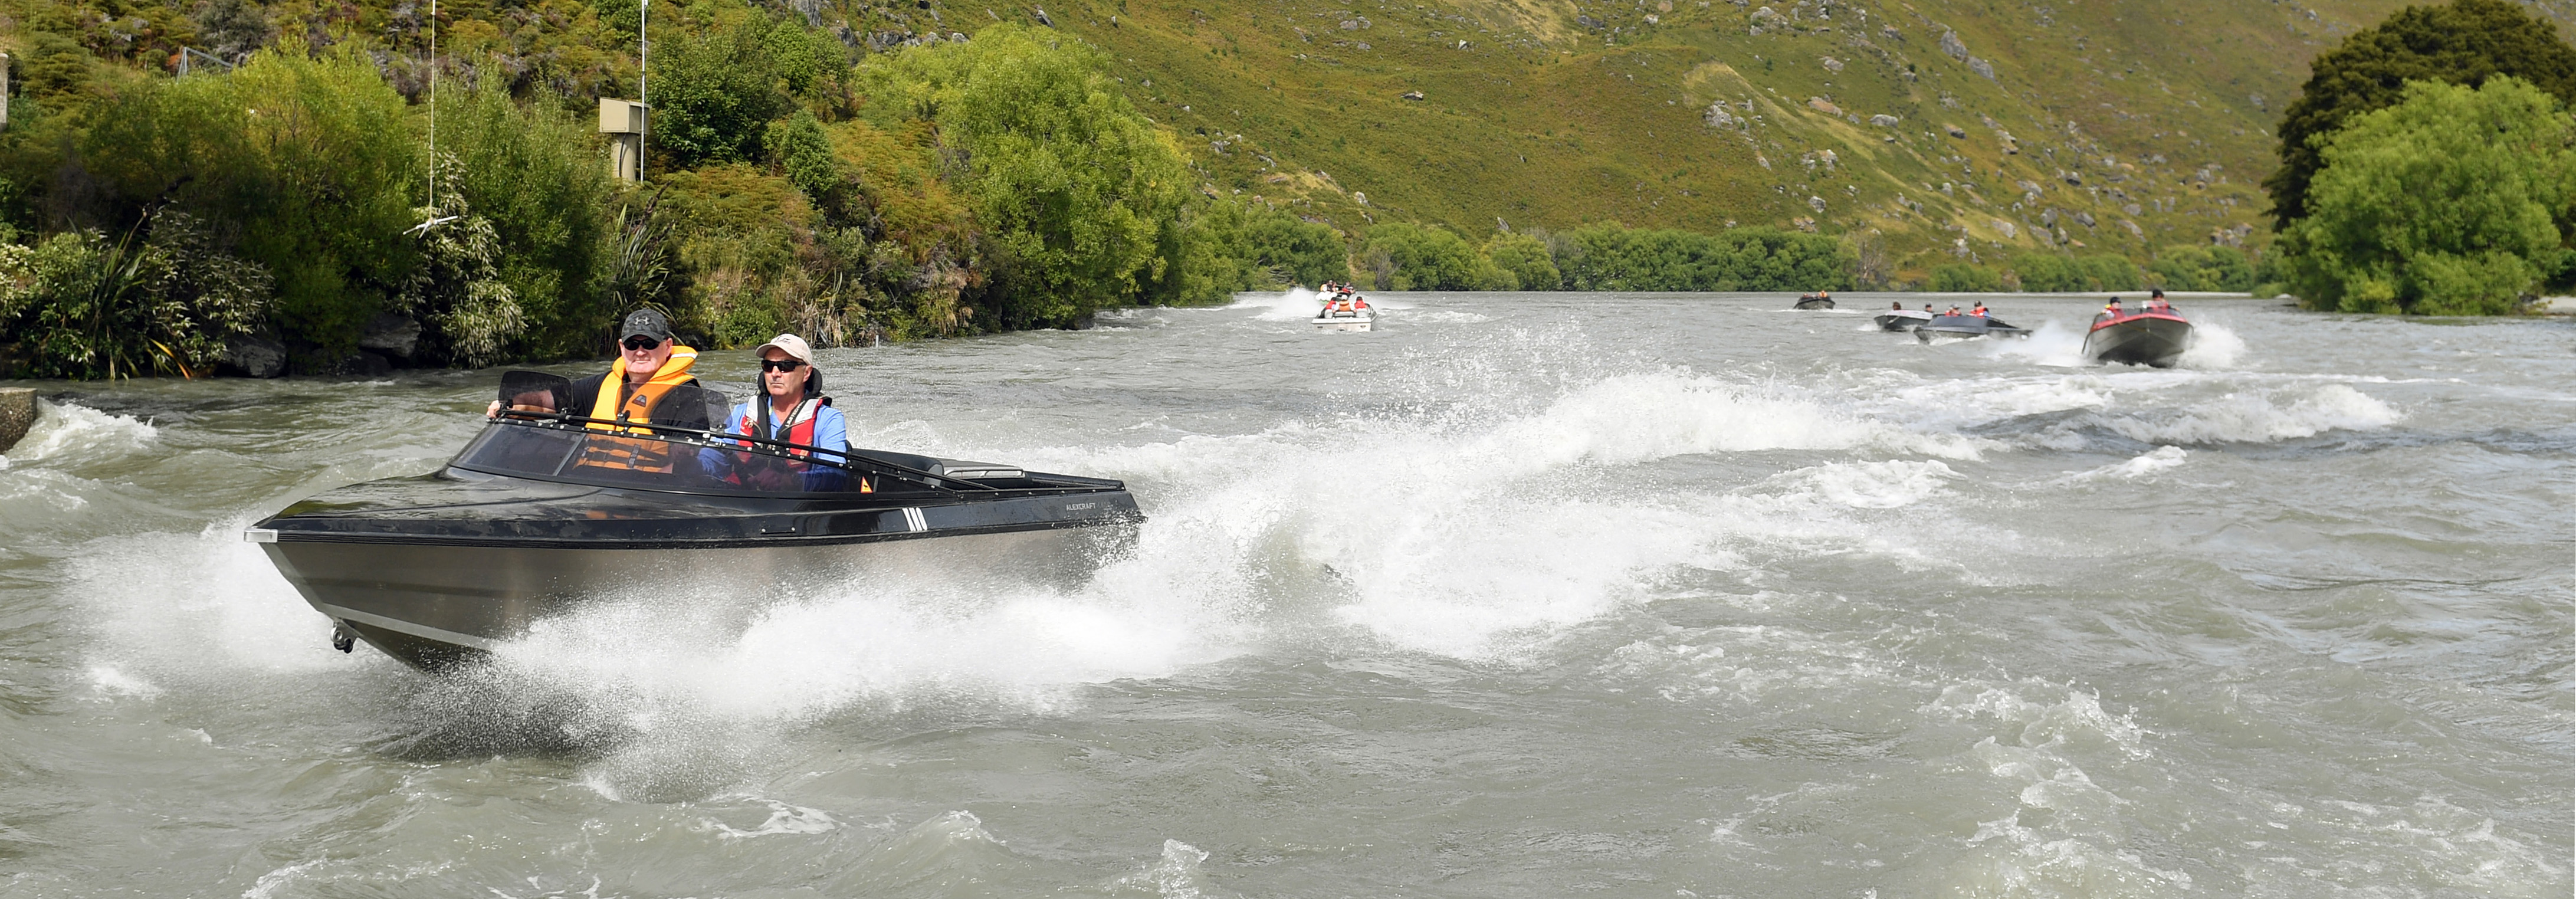 About 20 boats from the Otago Branch of Jet Boating New Zealand, pictured on the Matukituki River...